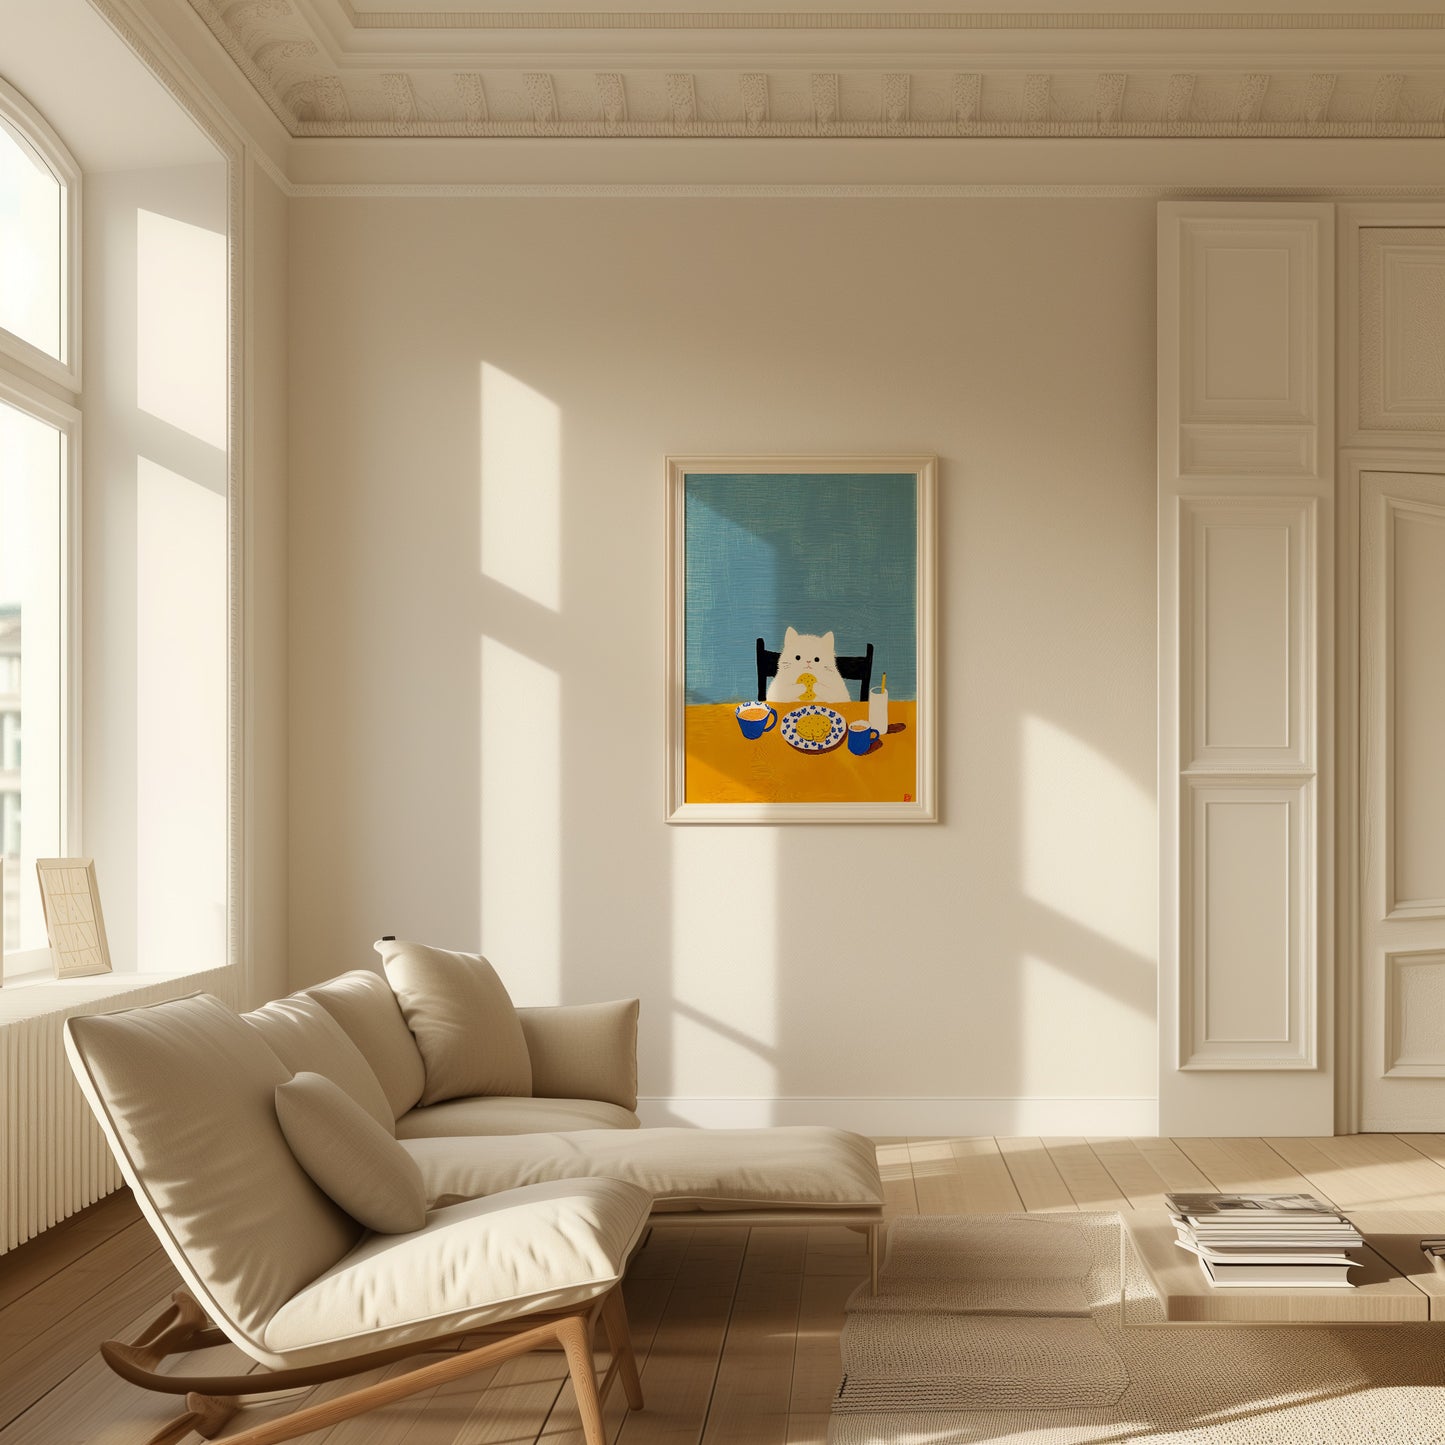 A cozy sunlit room with a modern sofa and a painting of a cat on the wall.